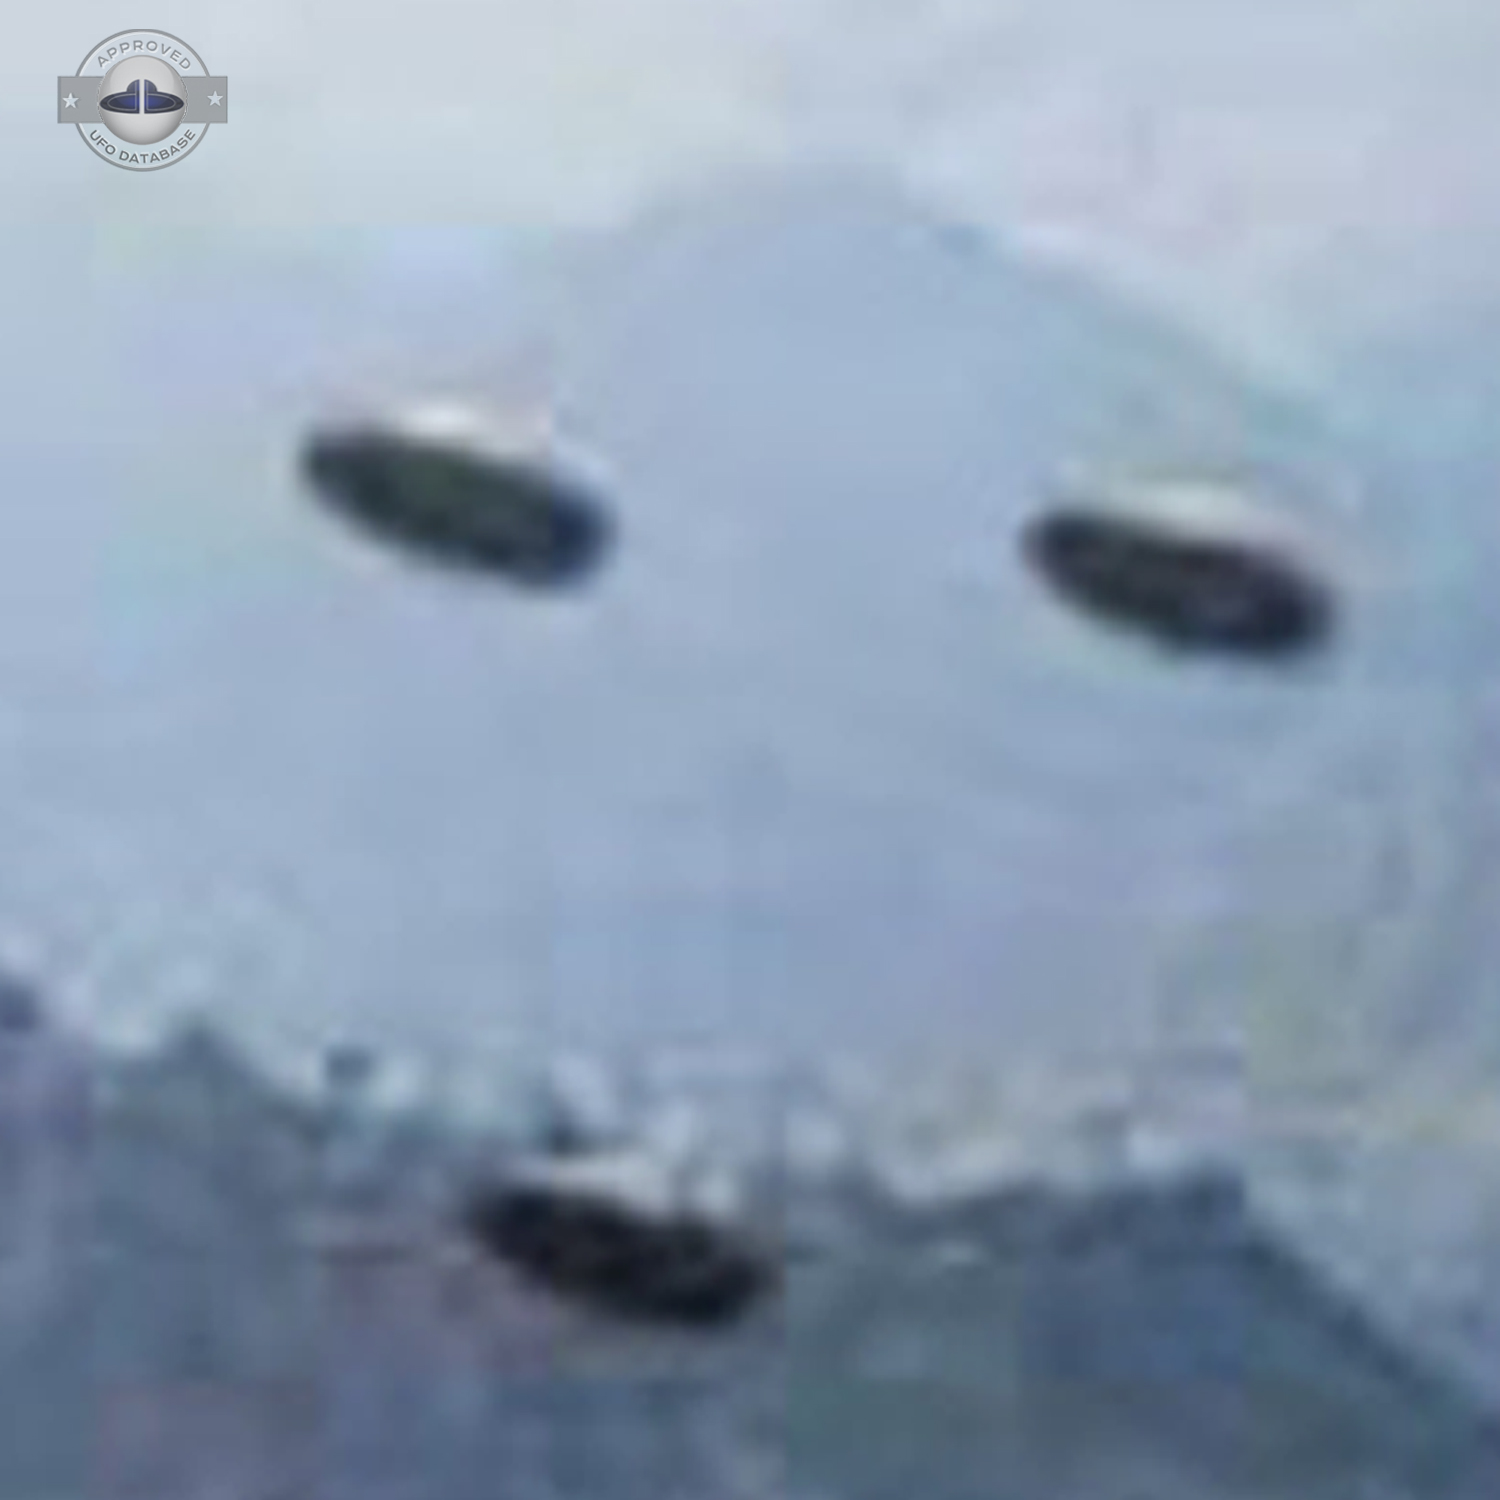 Fleet of 5 UFOs flying in precise formation Hills of Sombaria Gangtok UFO Picture #202-7